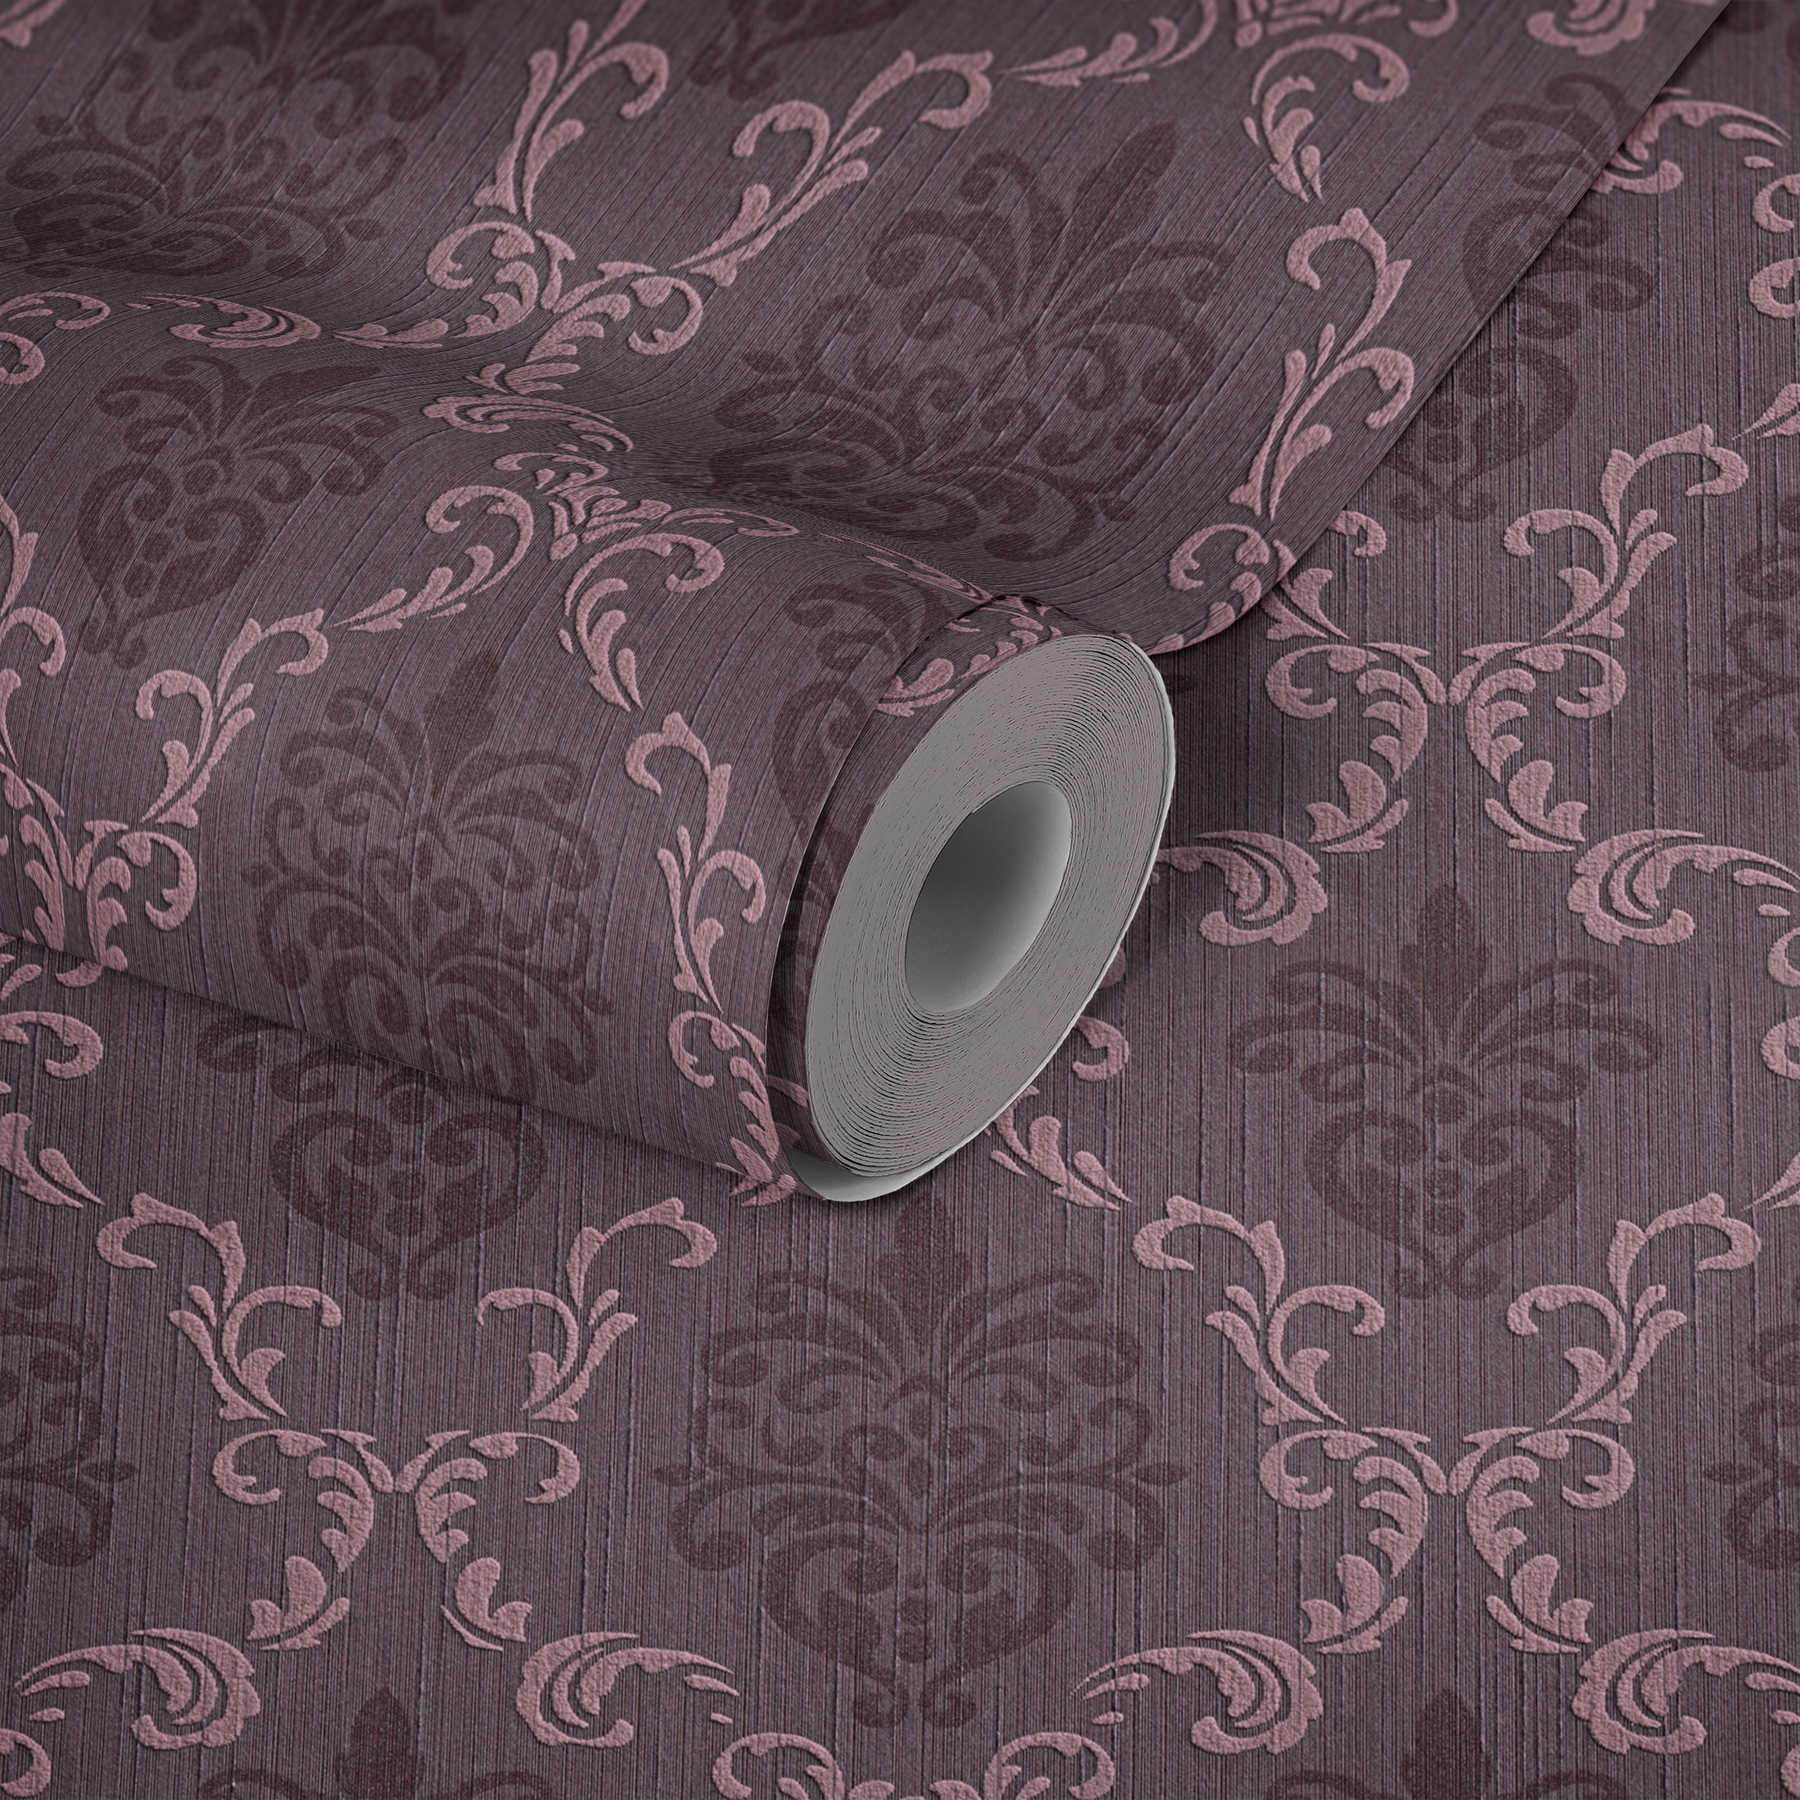             Baroque wallpaper with ornaments & textured pattern - purple
        